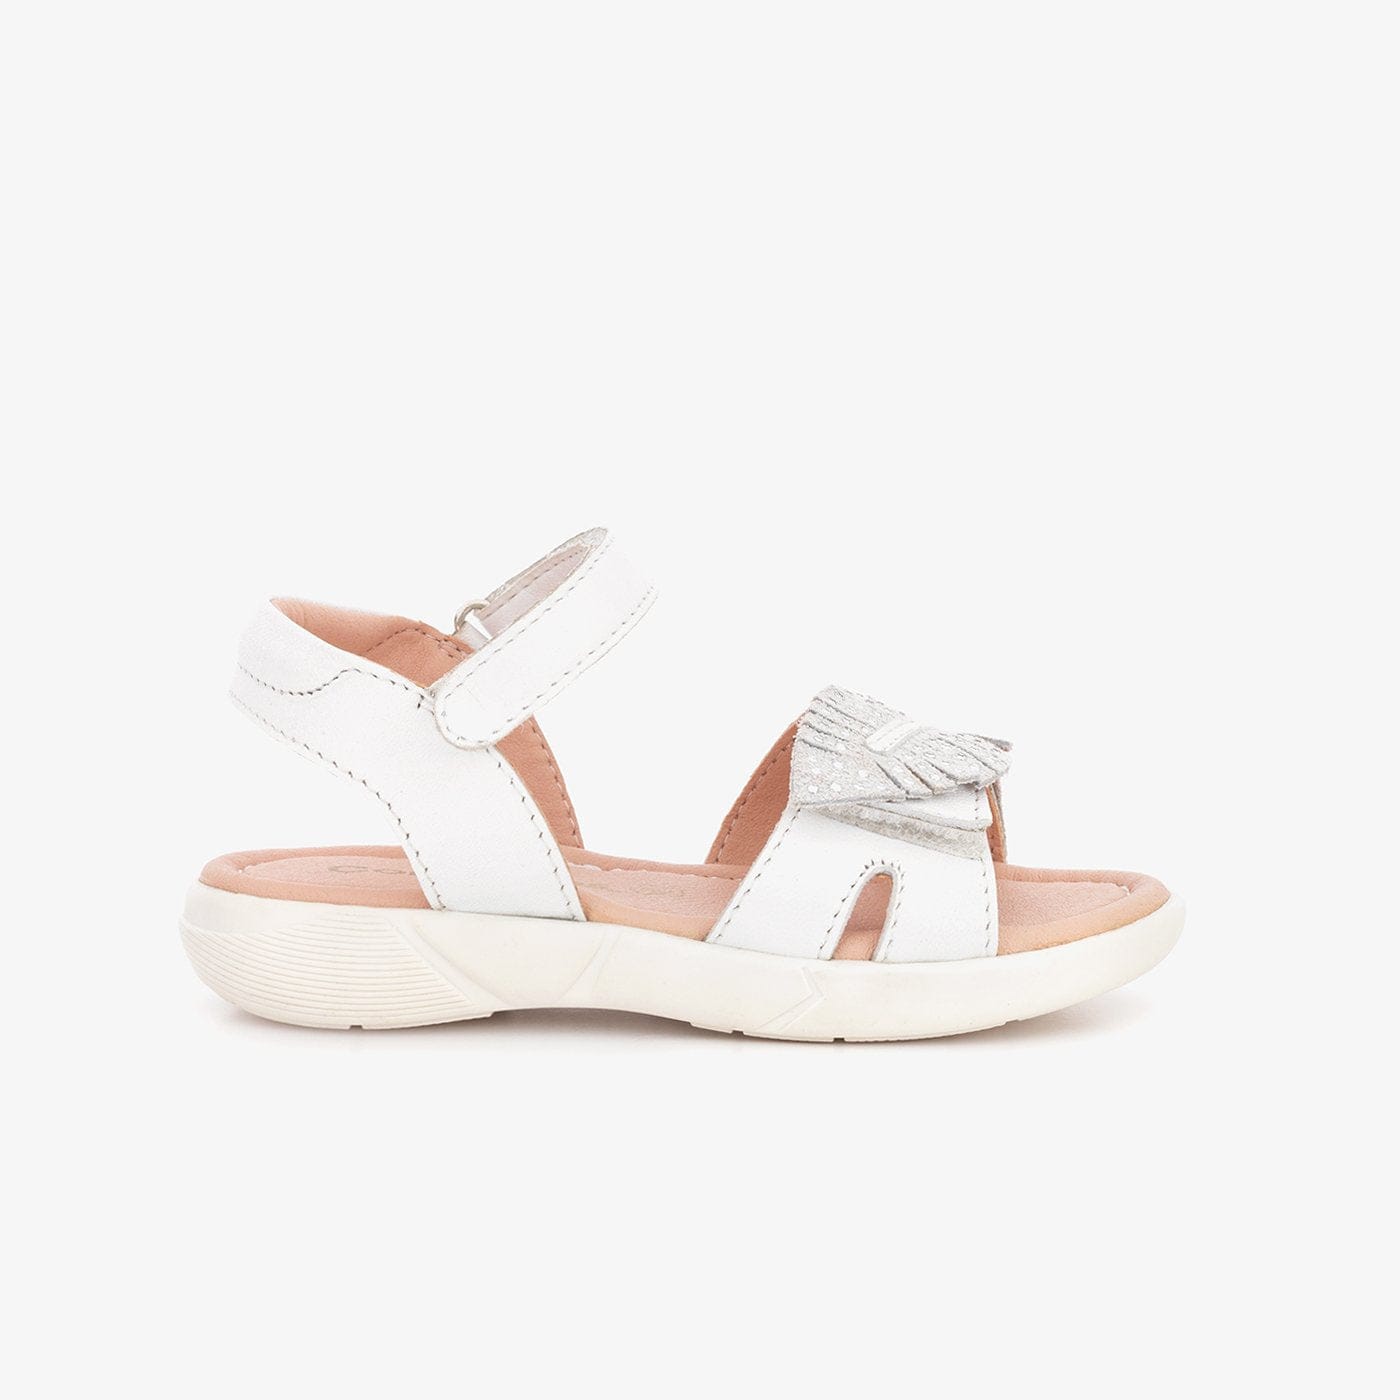 CONGUITOS Shoes Girl's White Leaf Leather Sandals